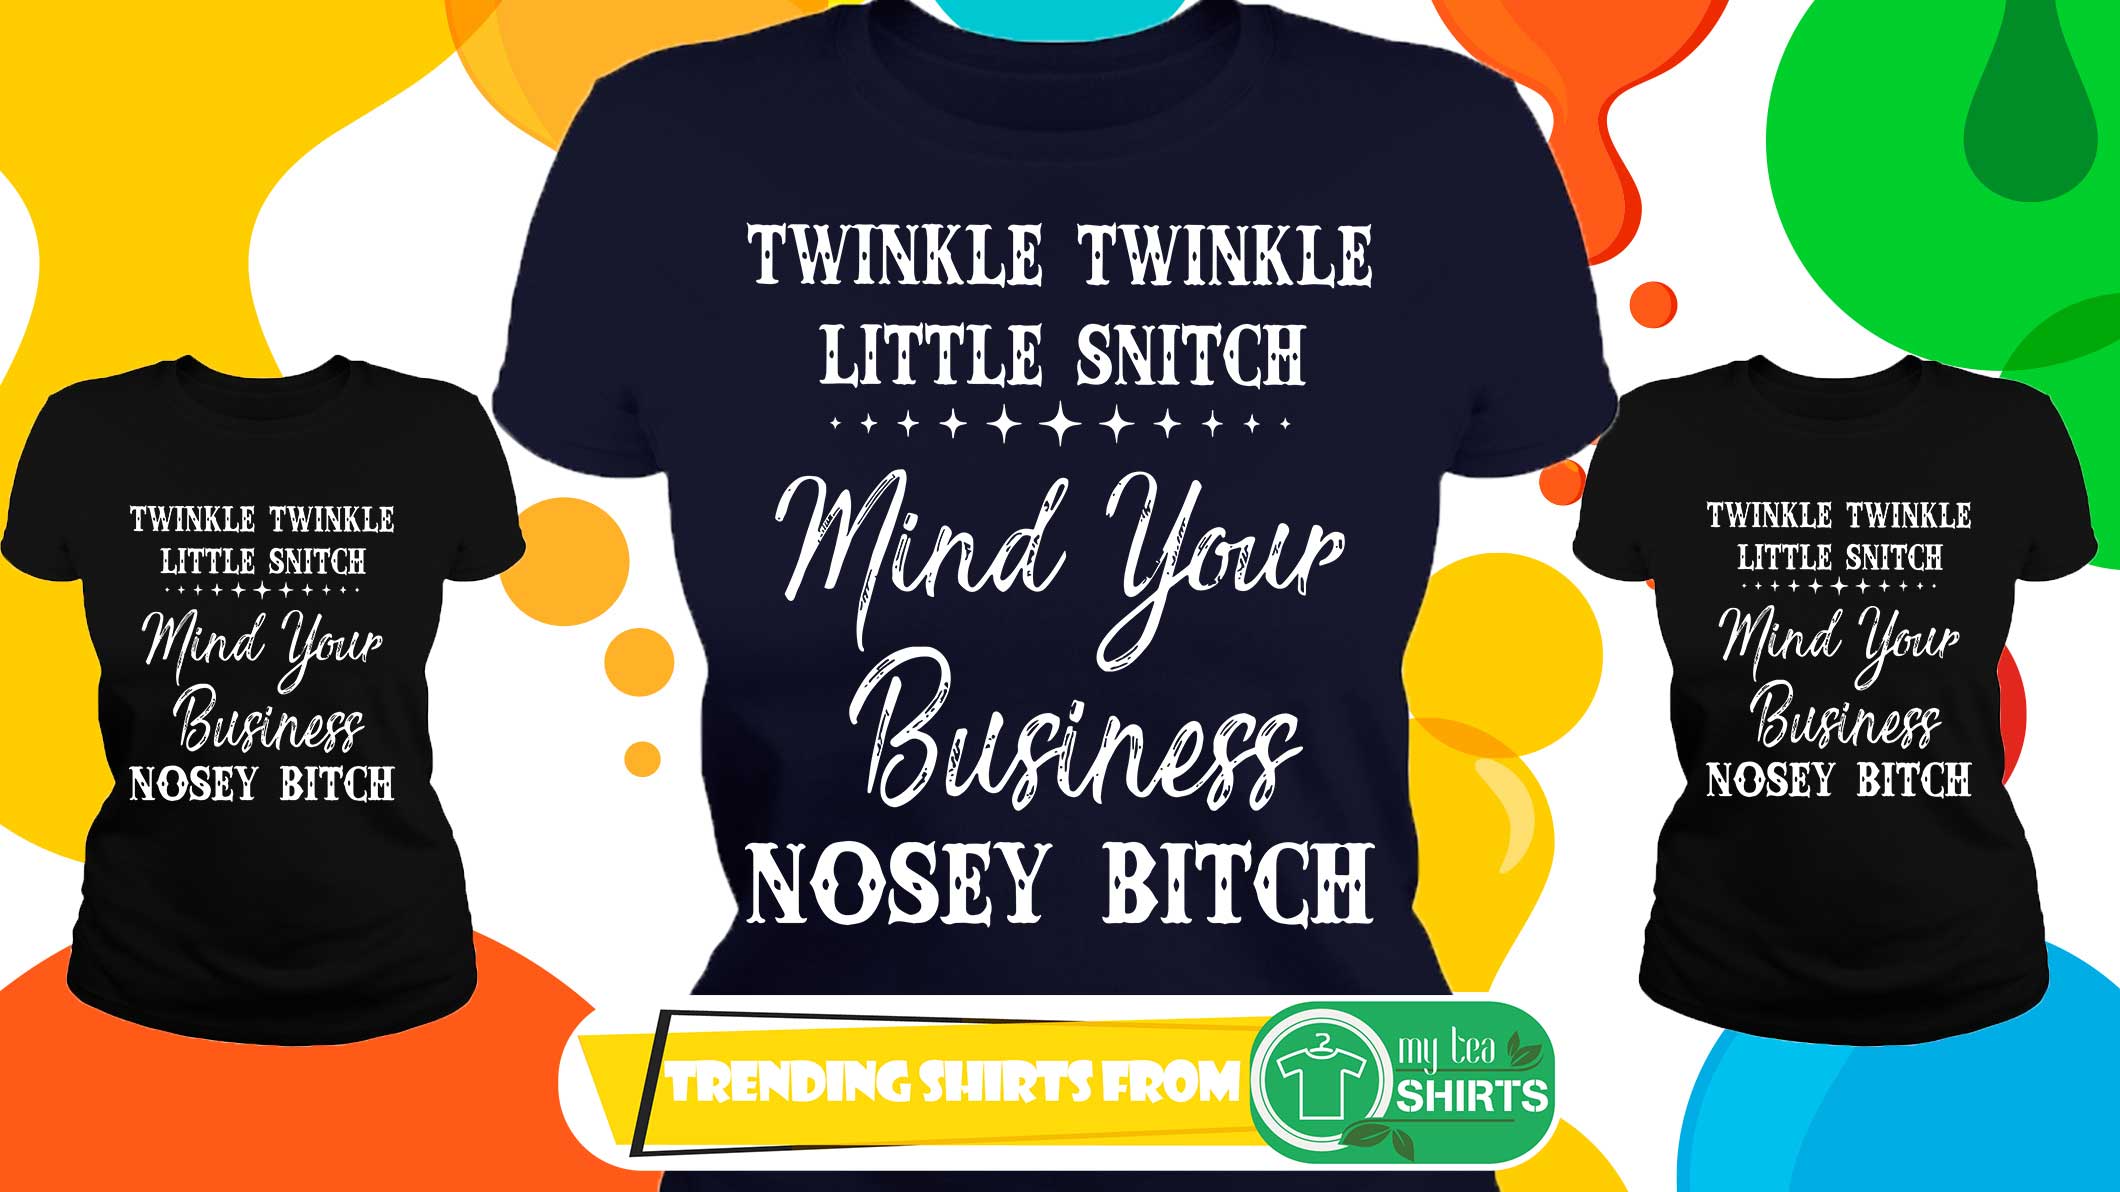 Twinkle twinkle little snitch mind your business nosey bitch shirt